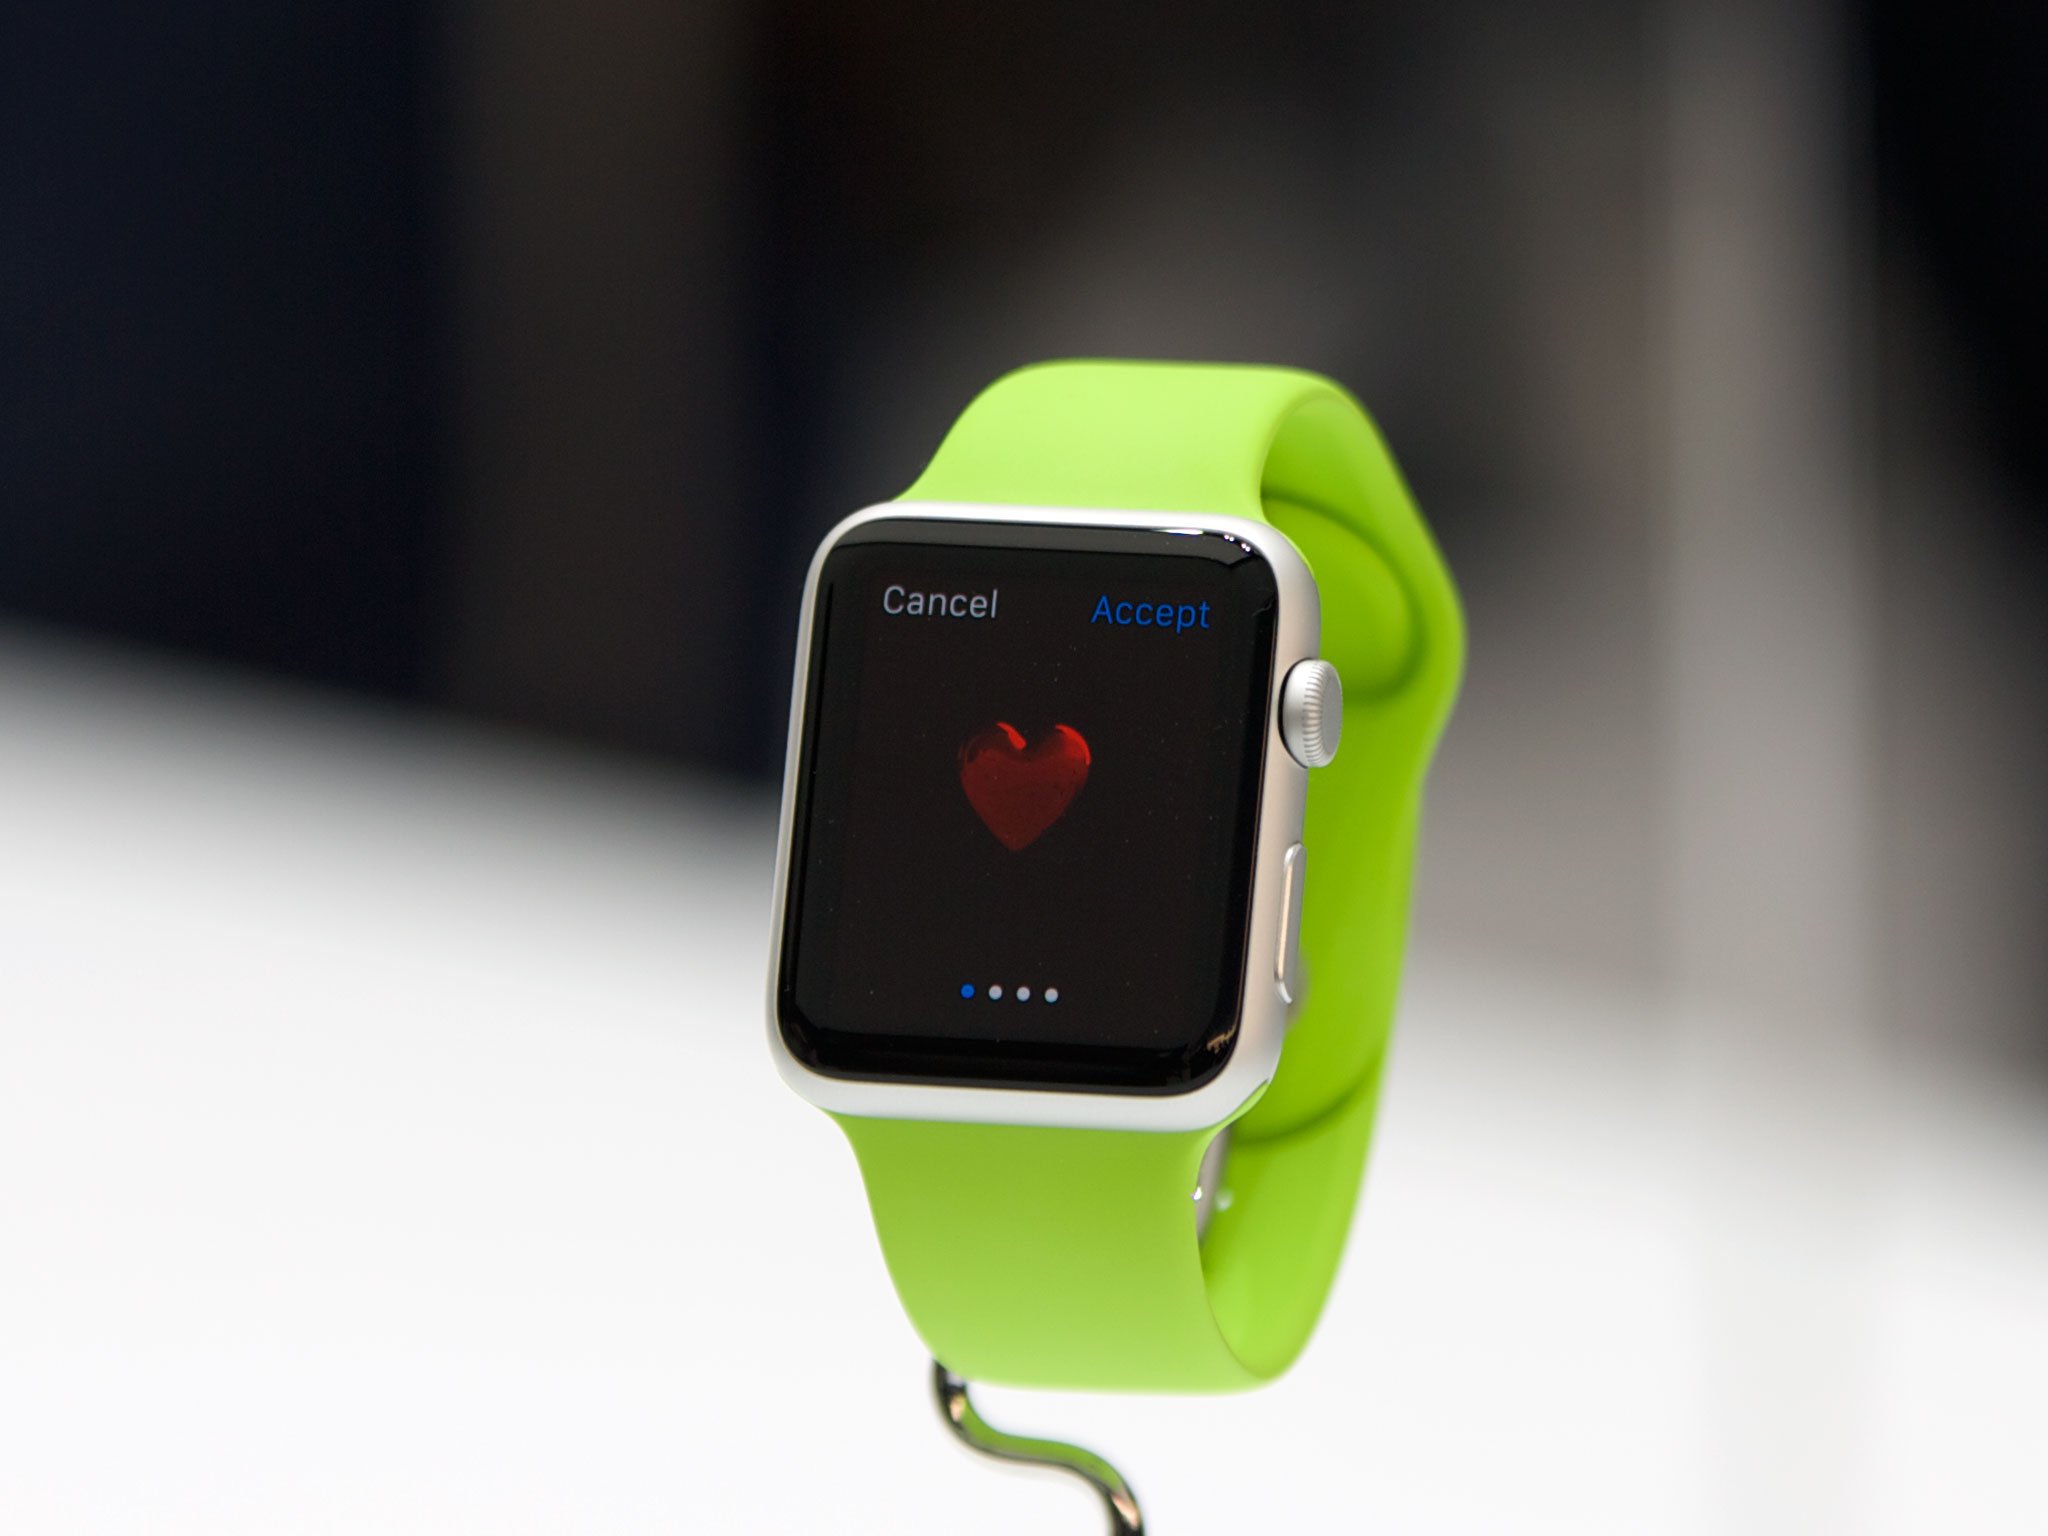 Apple Watch, WatchKit, and false expectations